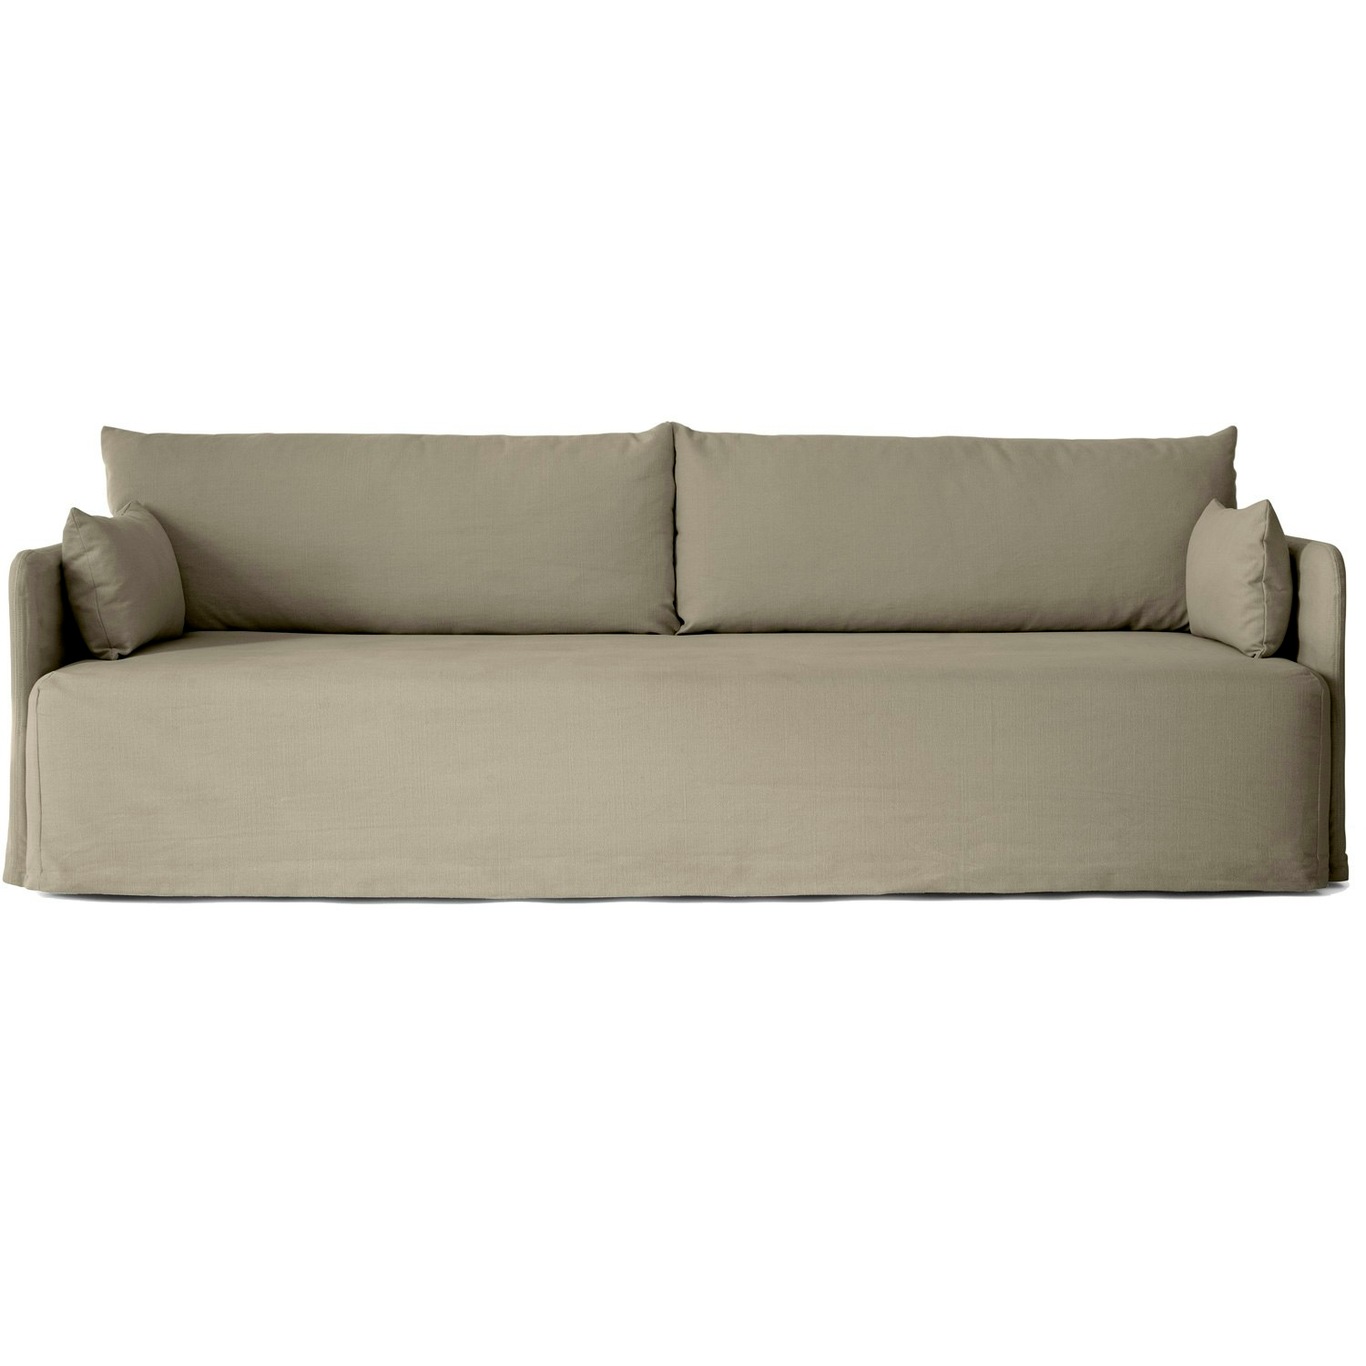 Offset Sofa 3-Seater Removable Upholstery Cotlin, Poppy Seed